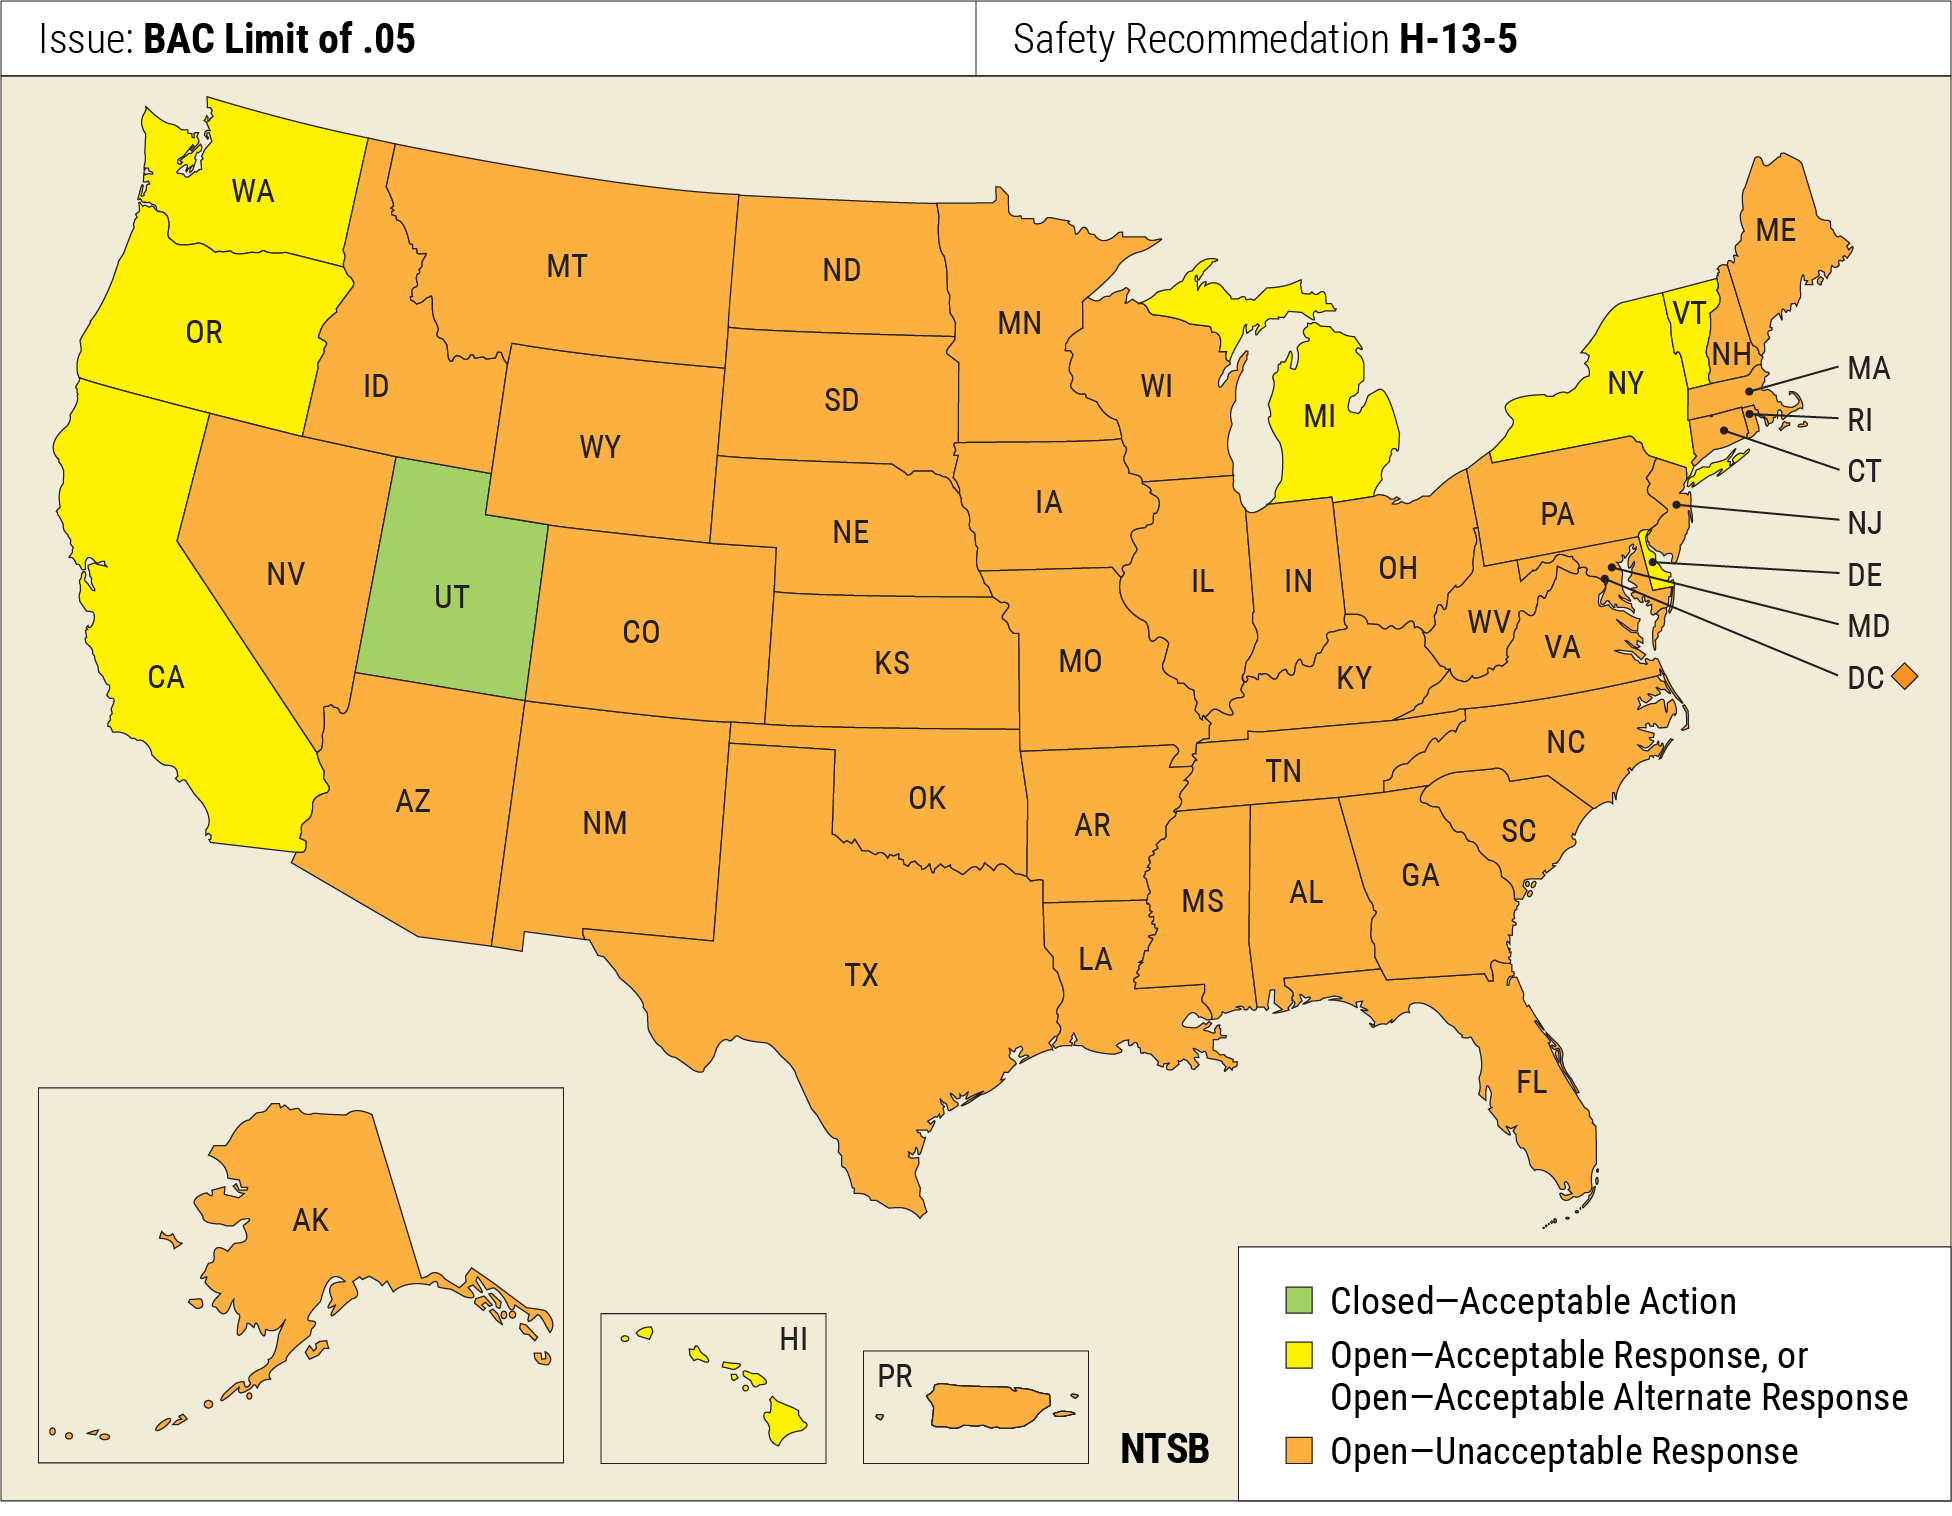 Map showing June 22 status of recommendation H-13-15